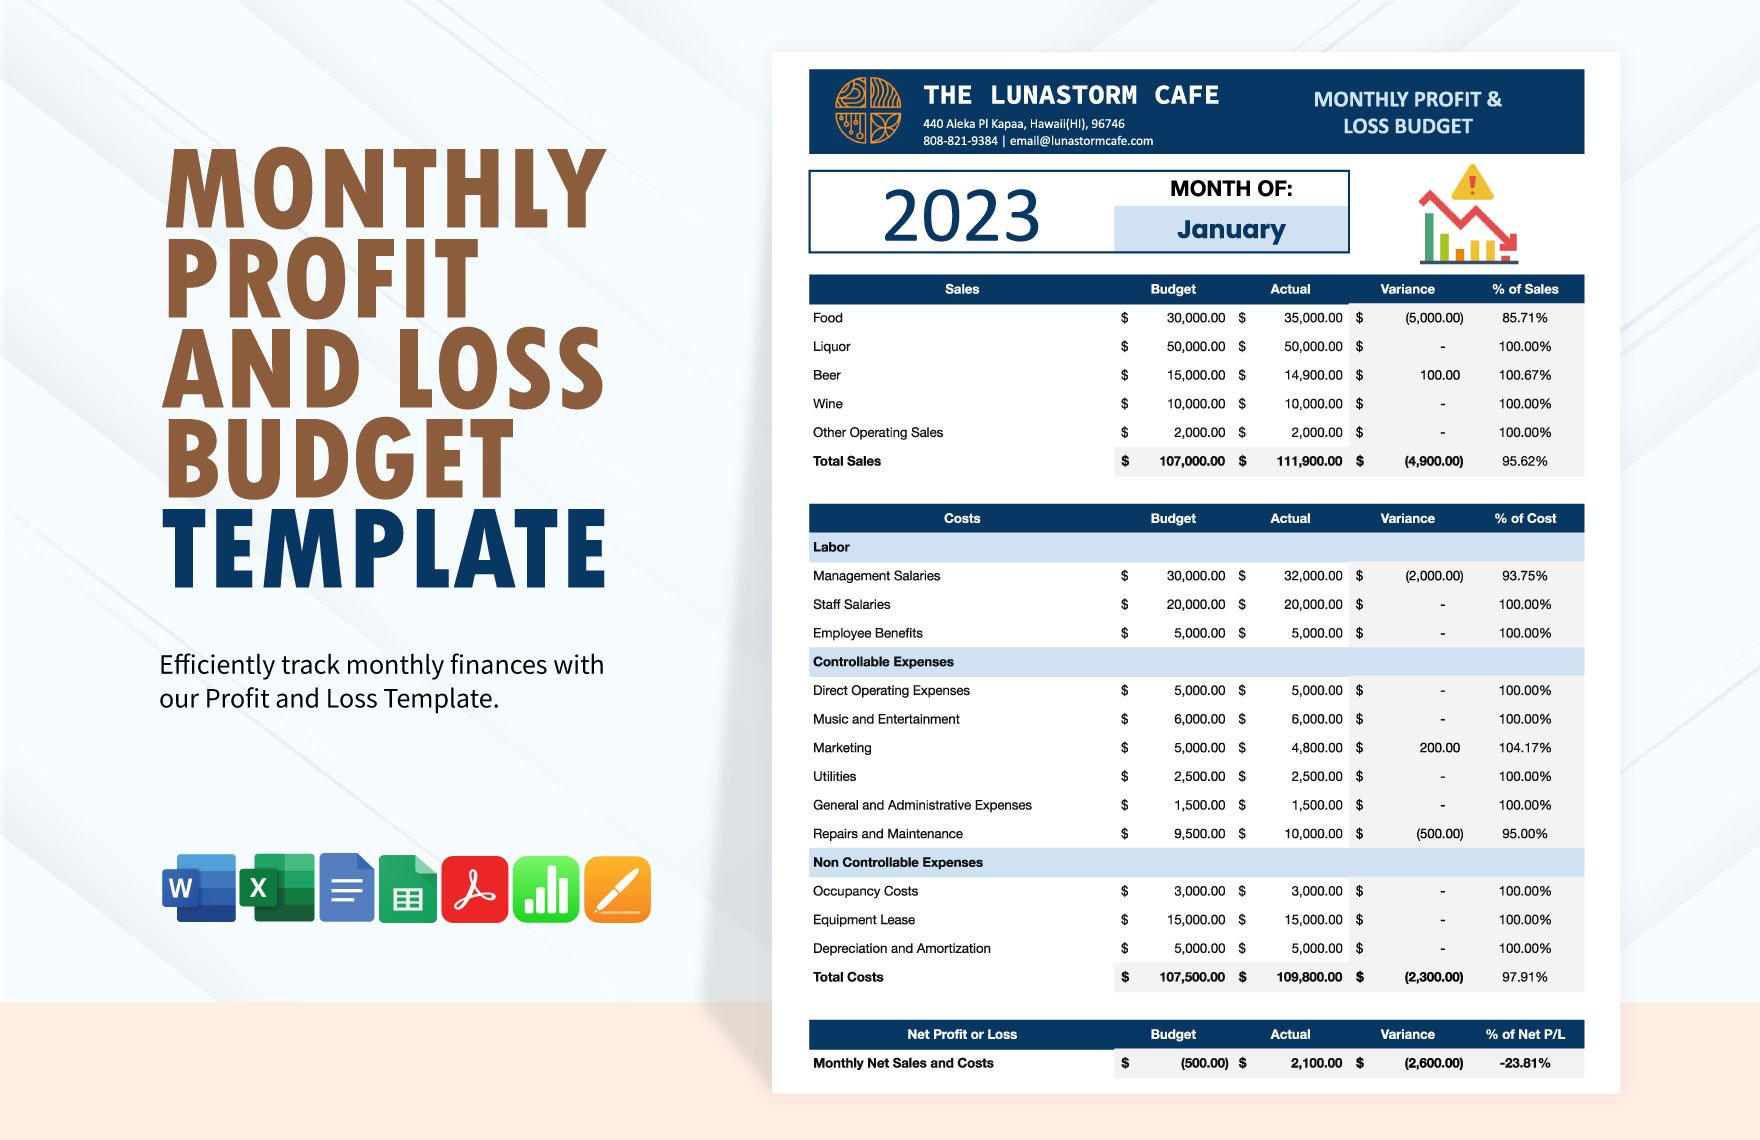 Monthly Profit and Loss Budget Template in Word, Google Docs, Excel, PDF, Google Sheets, Apple Pages, Apple Numbers